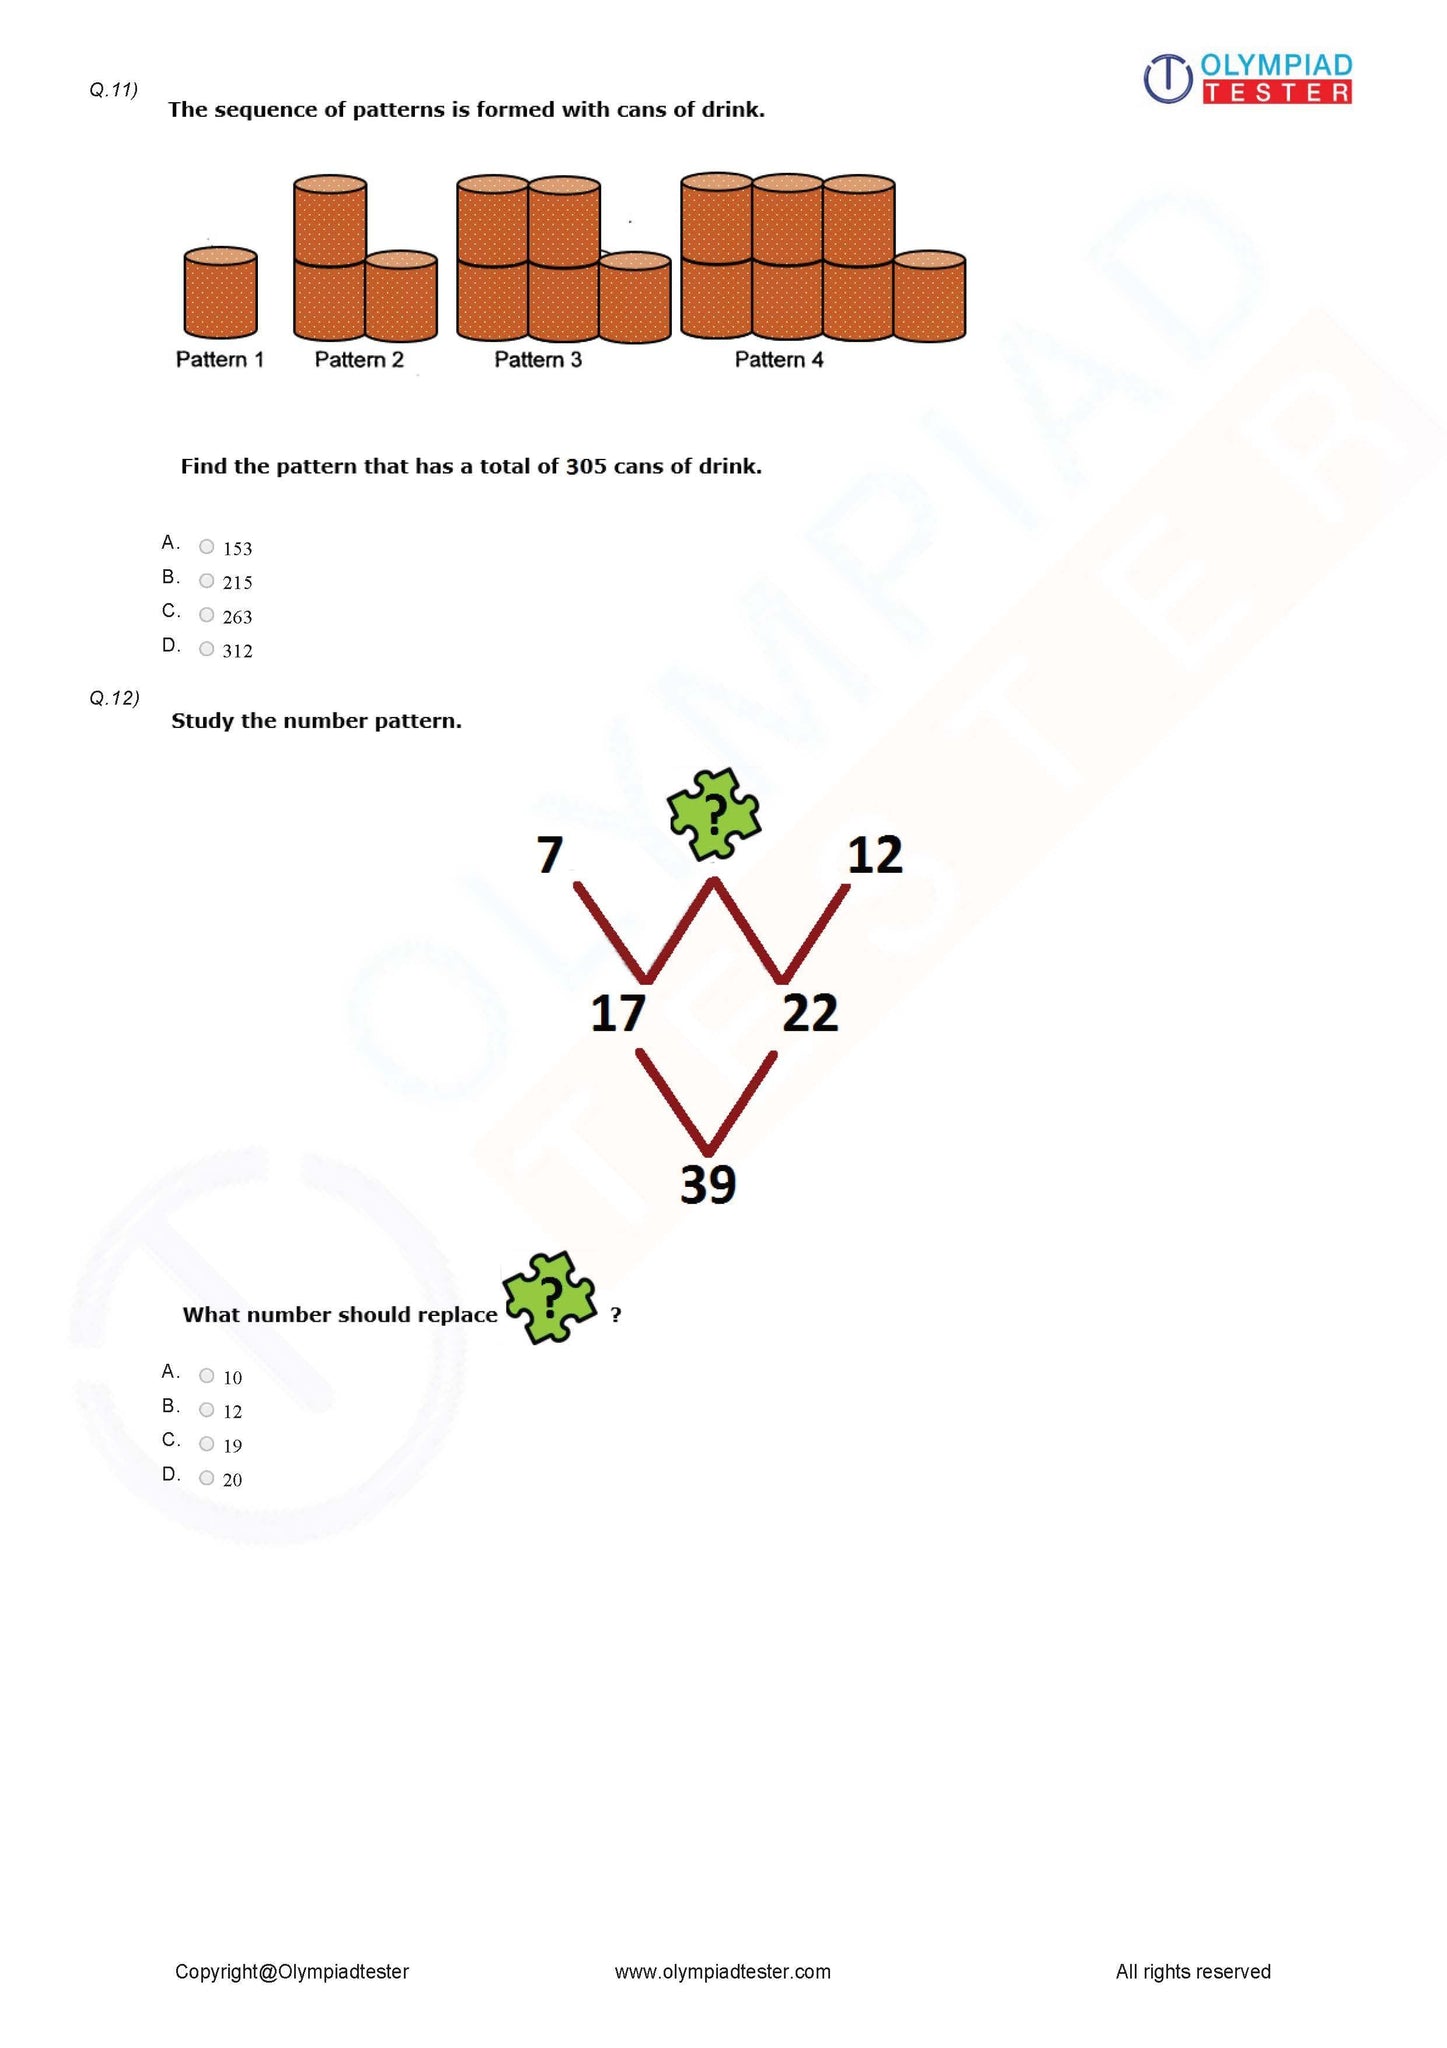 Class 5 Maths Olympiad Question Papers Course Olympiadtester